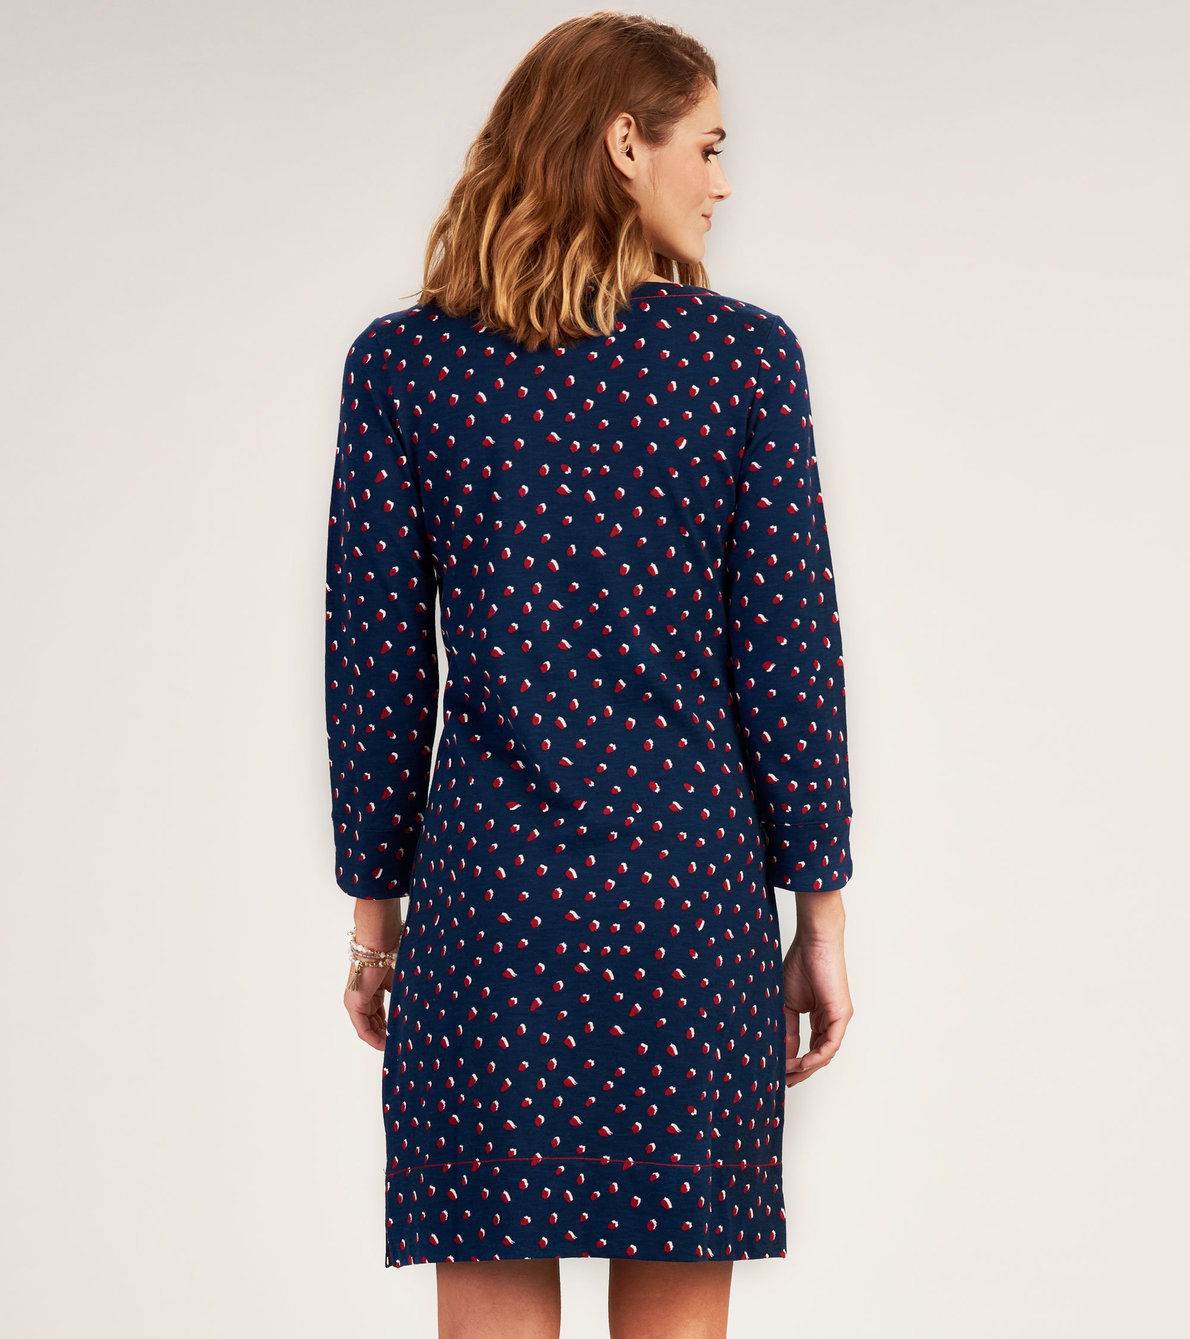 View larger image of Lucy Dress - Double Dots